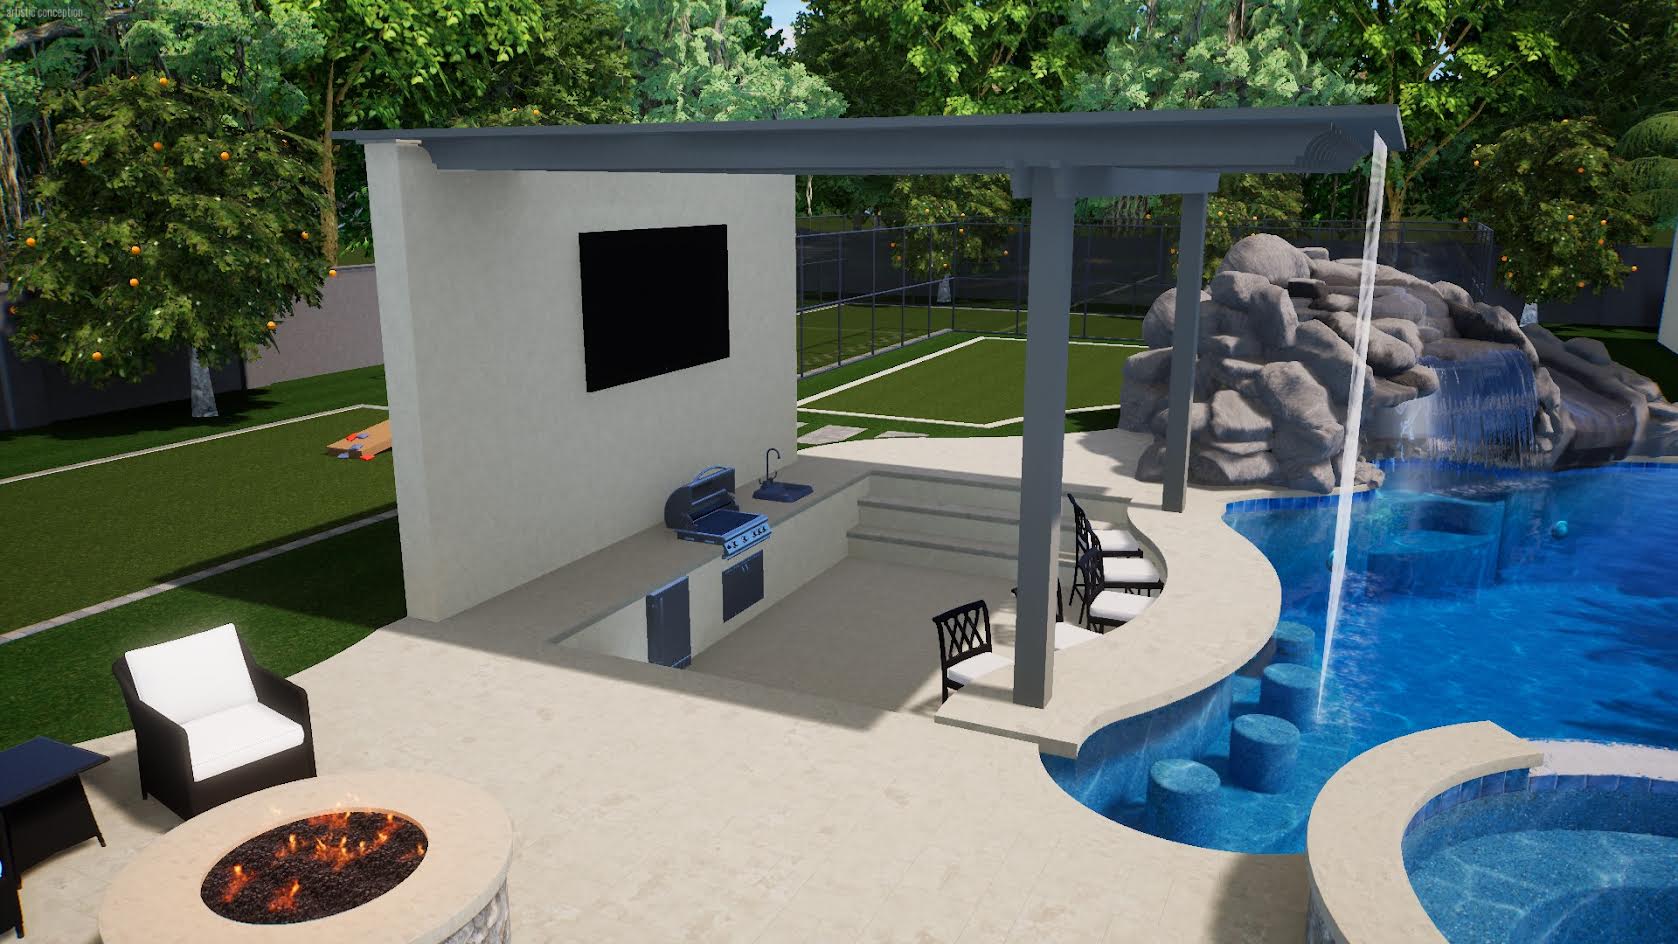 Creative Pool, Spa with Outdoor Kitchen Designs Like No Other! No Limit Pools & Spas Mesa (602)421-9379